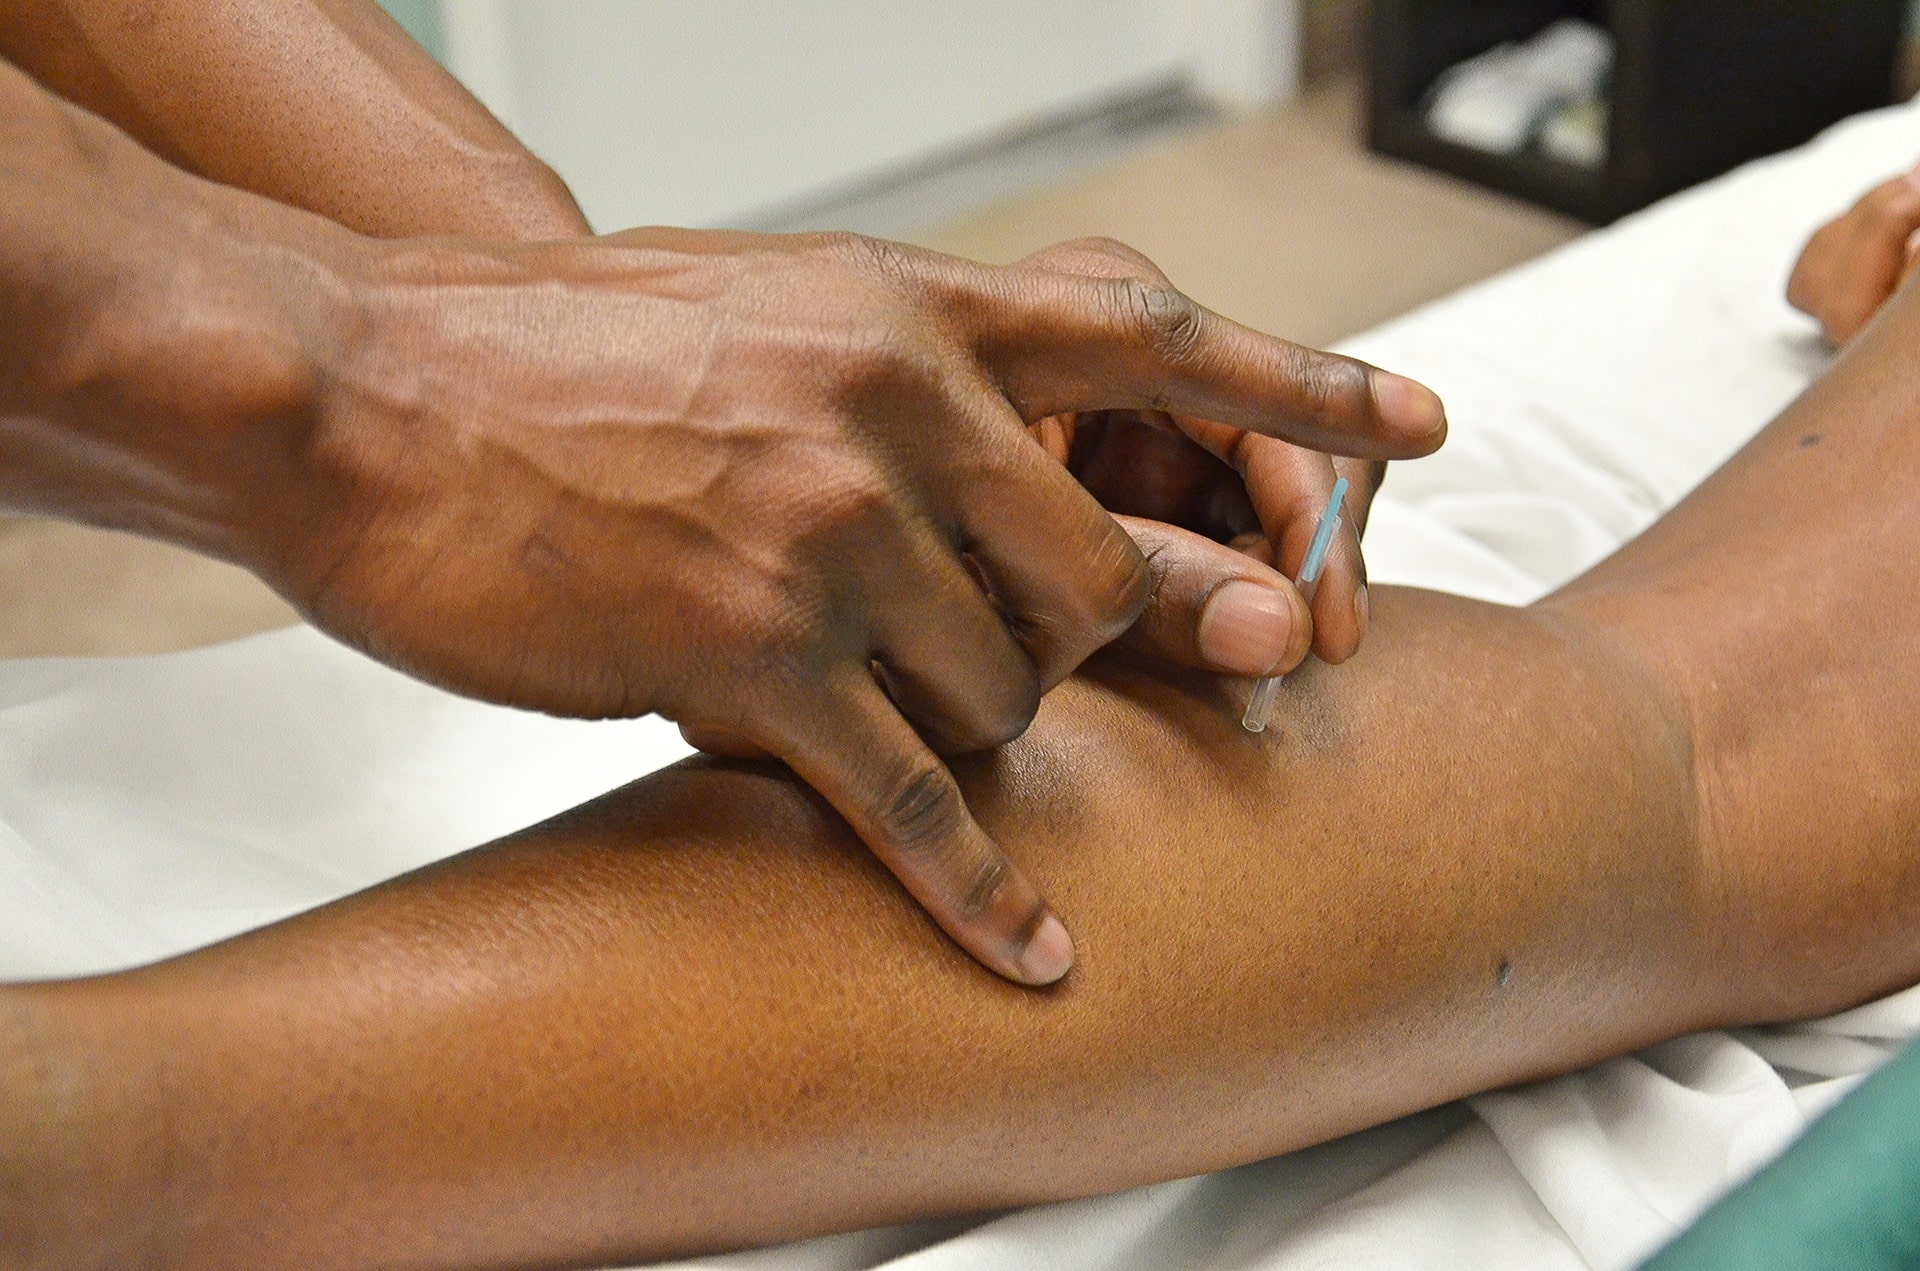 dry needling procedure done on an arm